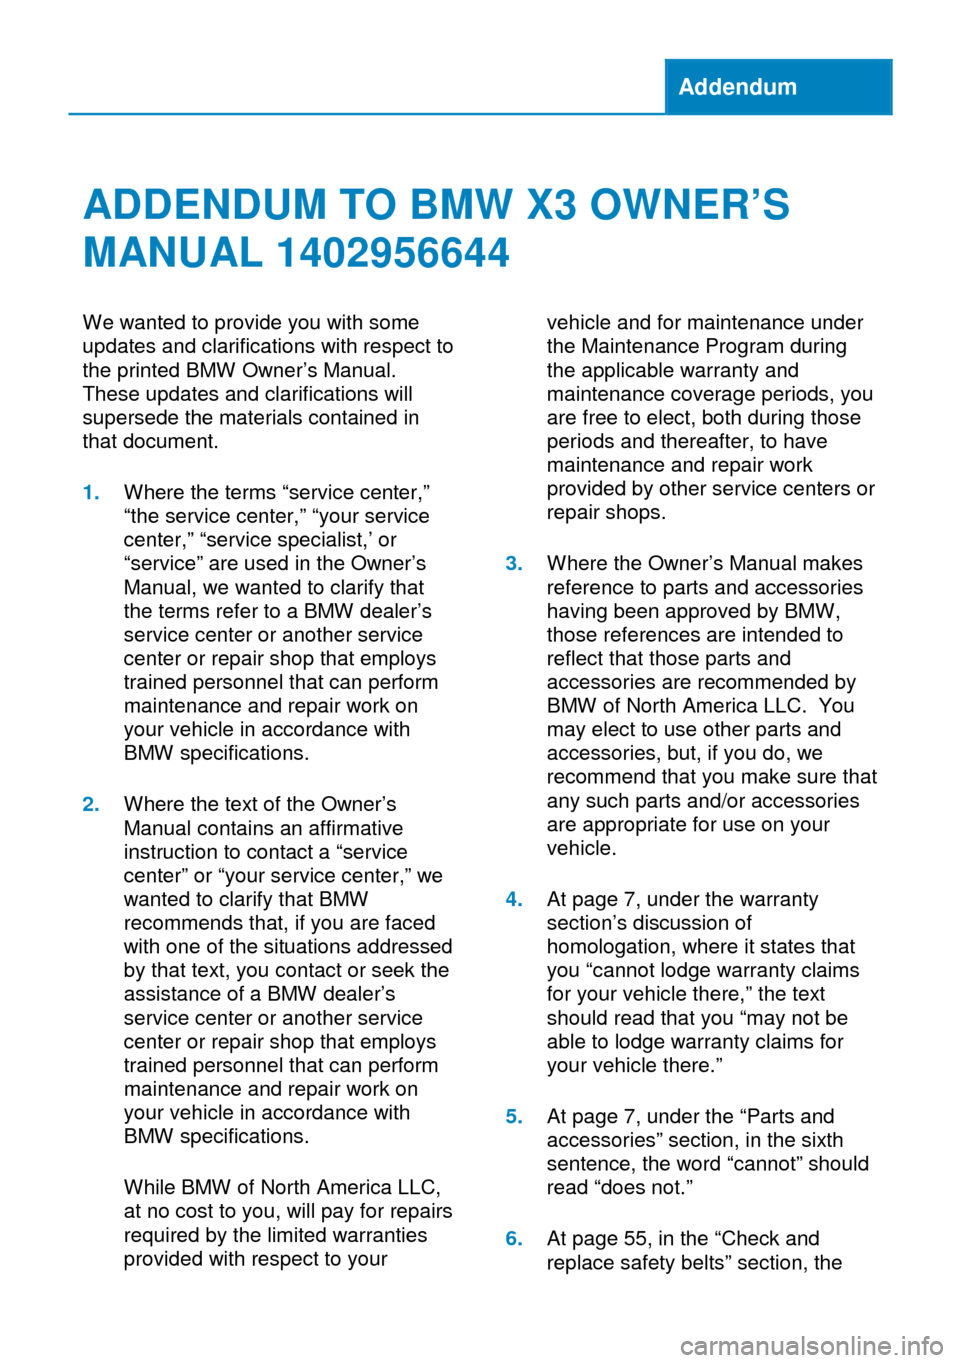 BMW X3 2014 F25 Owners Manual Addendum
ADDENDUM TO BMW X3 OWNER’S
MANUAL 1402956644
We wanted to provide you with some
updates and clarifications with respect to
the printed BMW Owner’s Manual.
These updates and clarifications